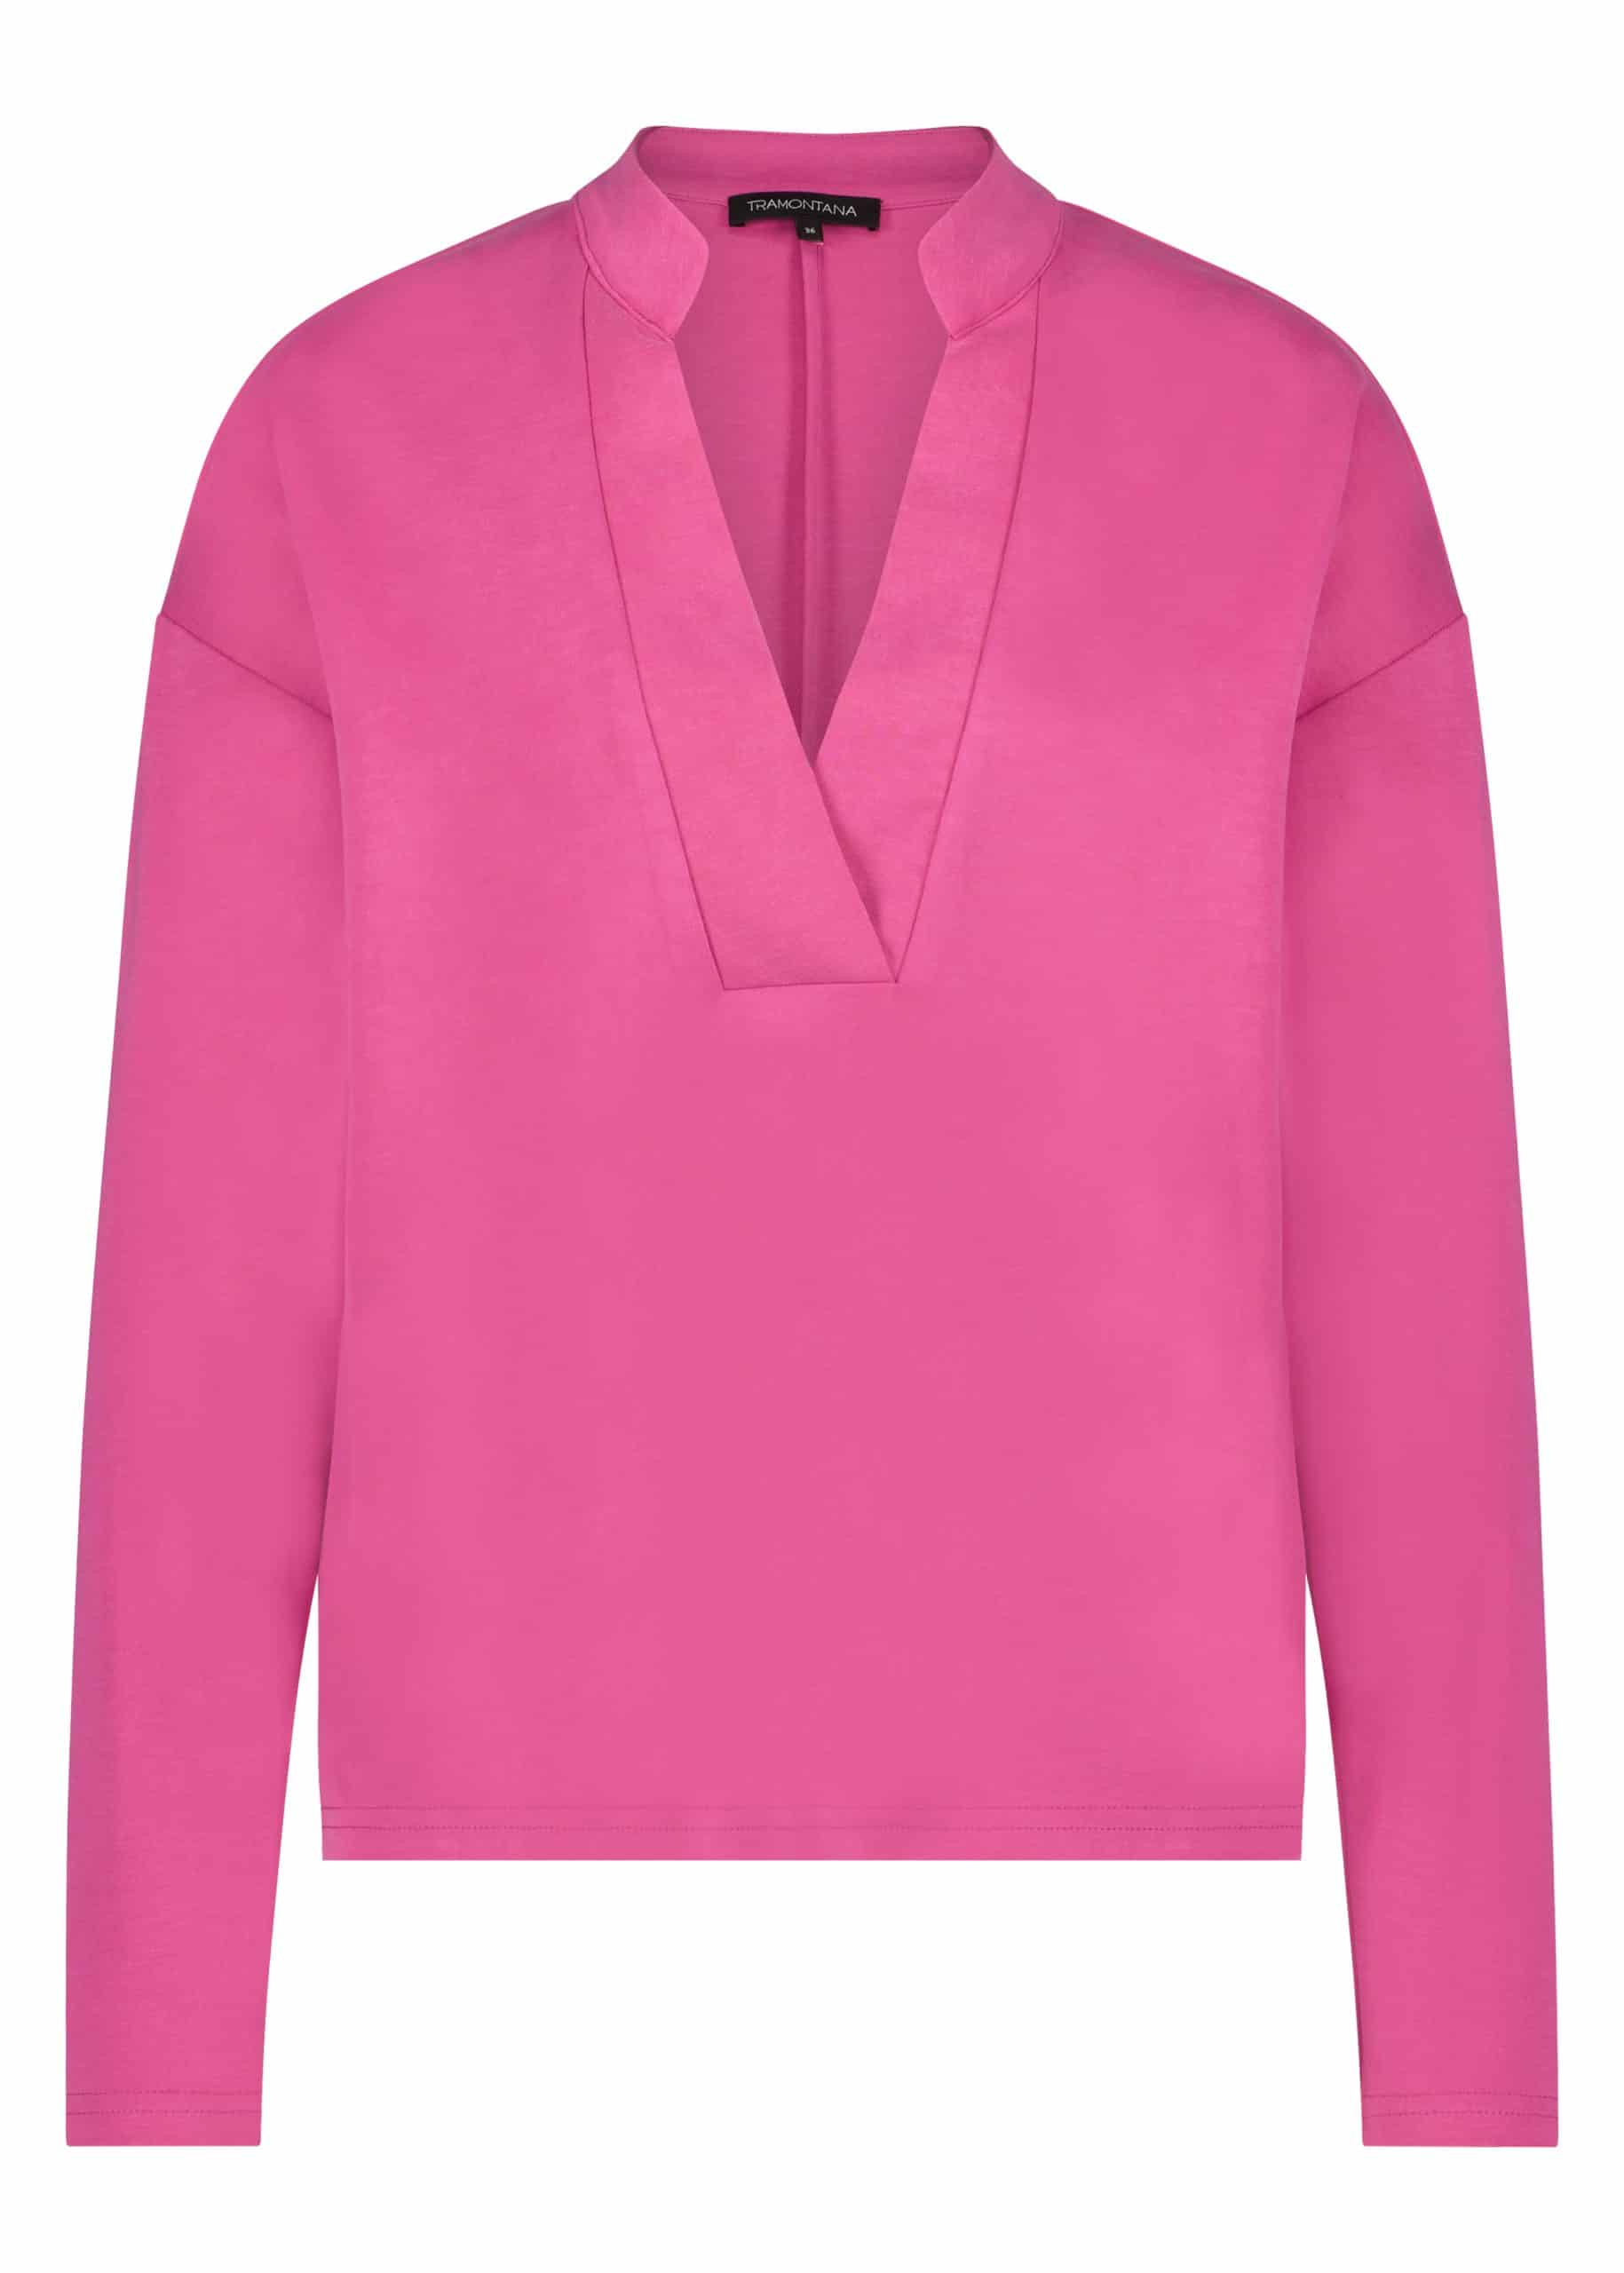 Tramontana Top Travel Solid Pink